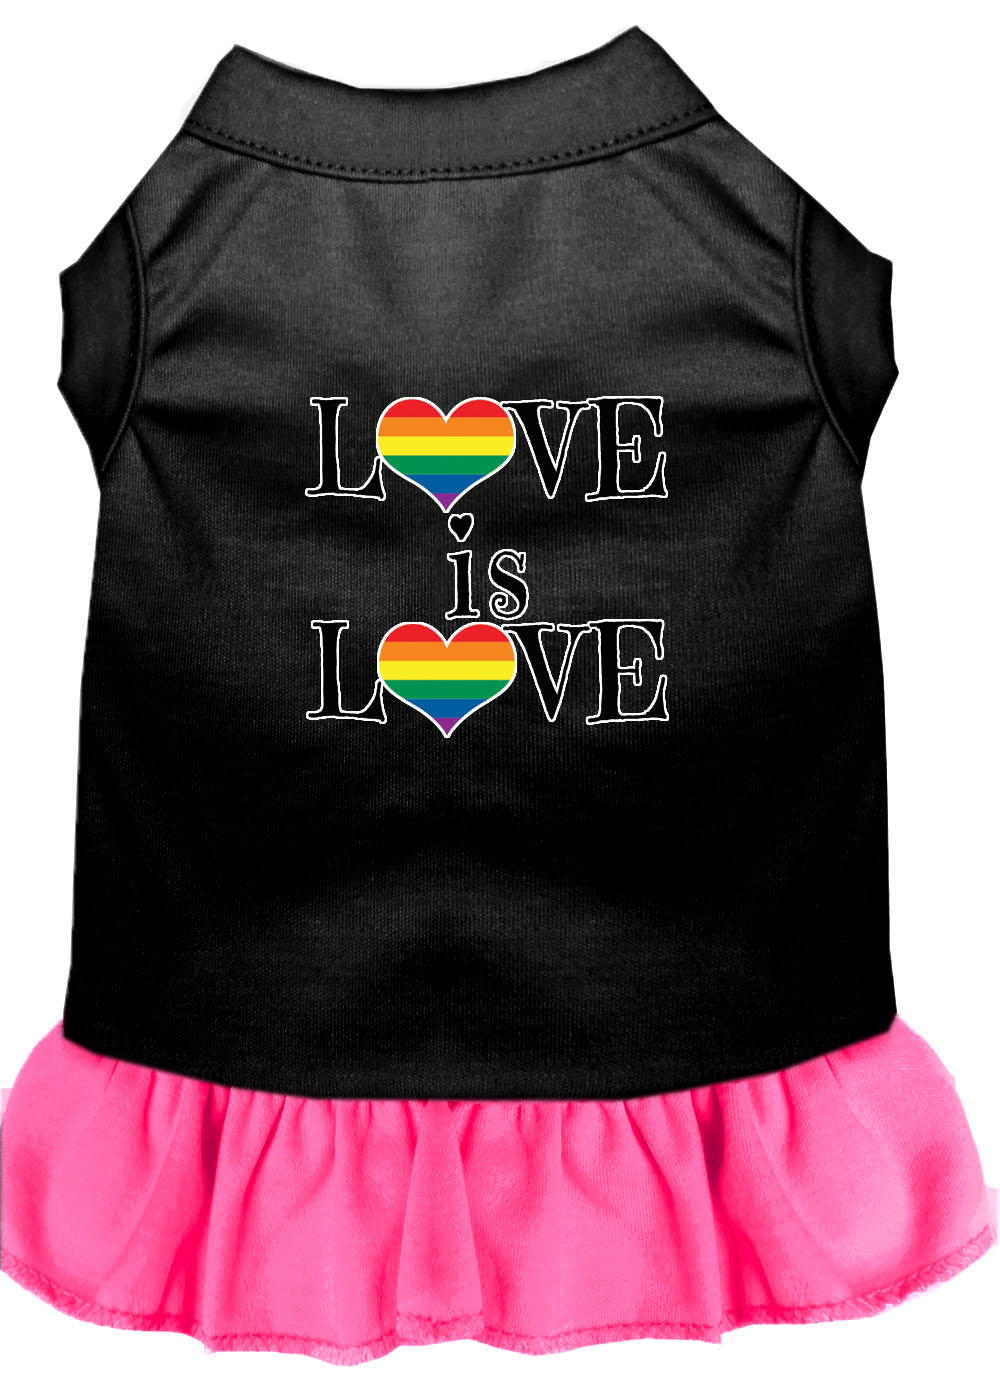 Love is Love Screen Print Dog Dress Black with Bright Pink XL